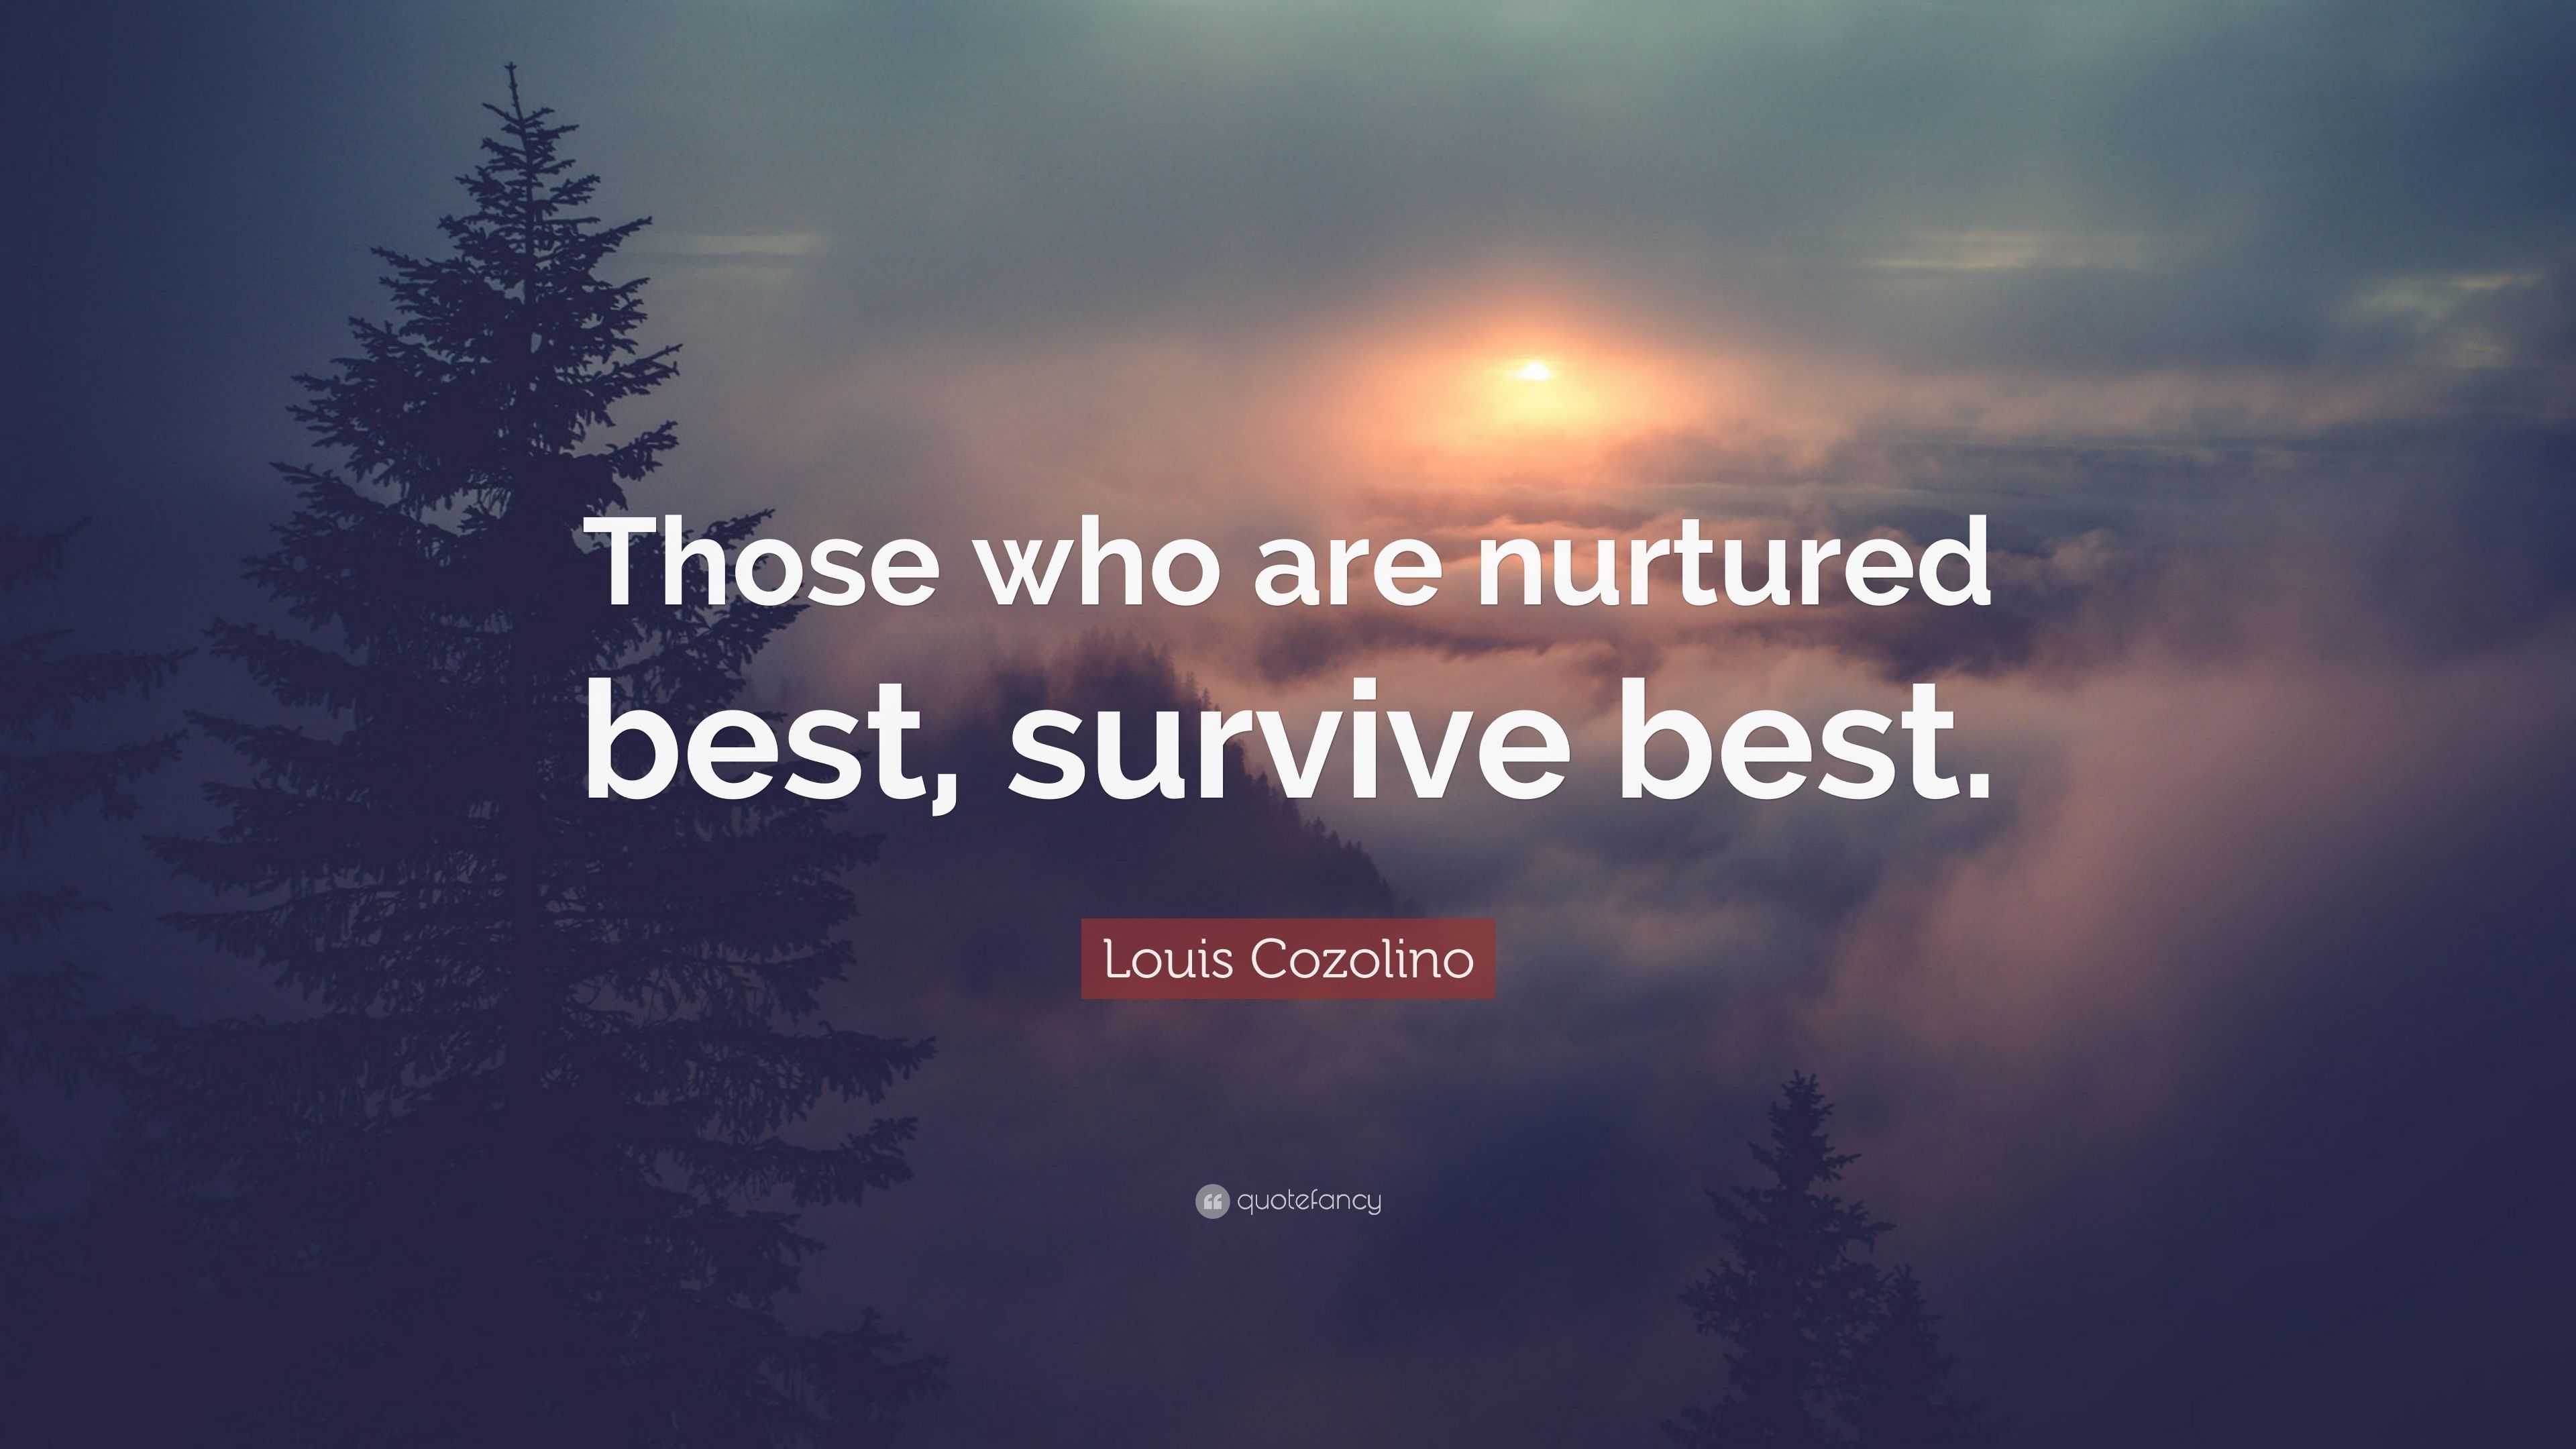 Louis Cozolino Quote: “We are not the survival of the fittest. We are the  survival of